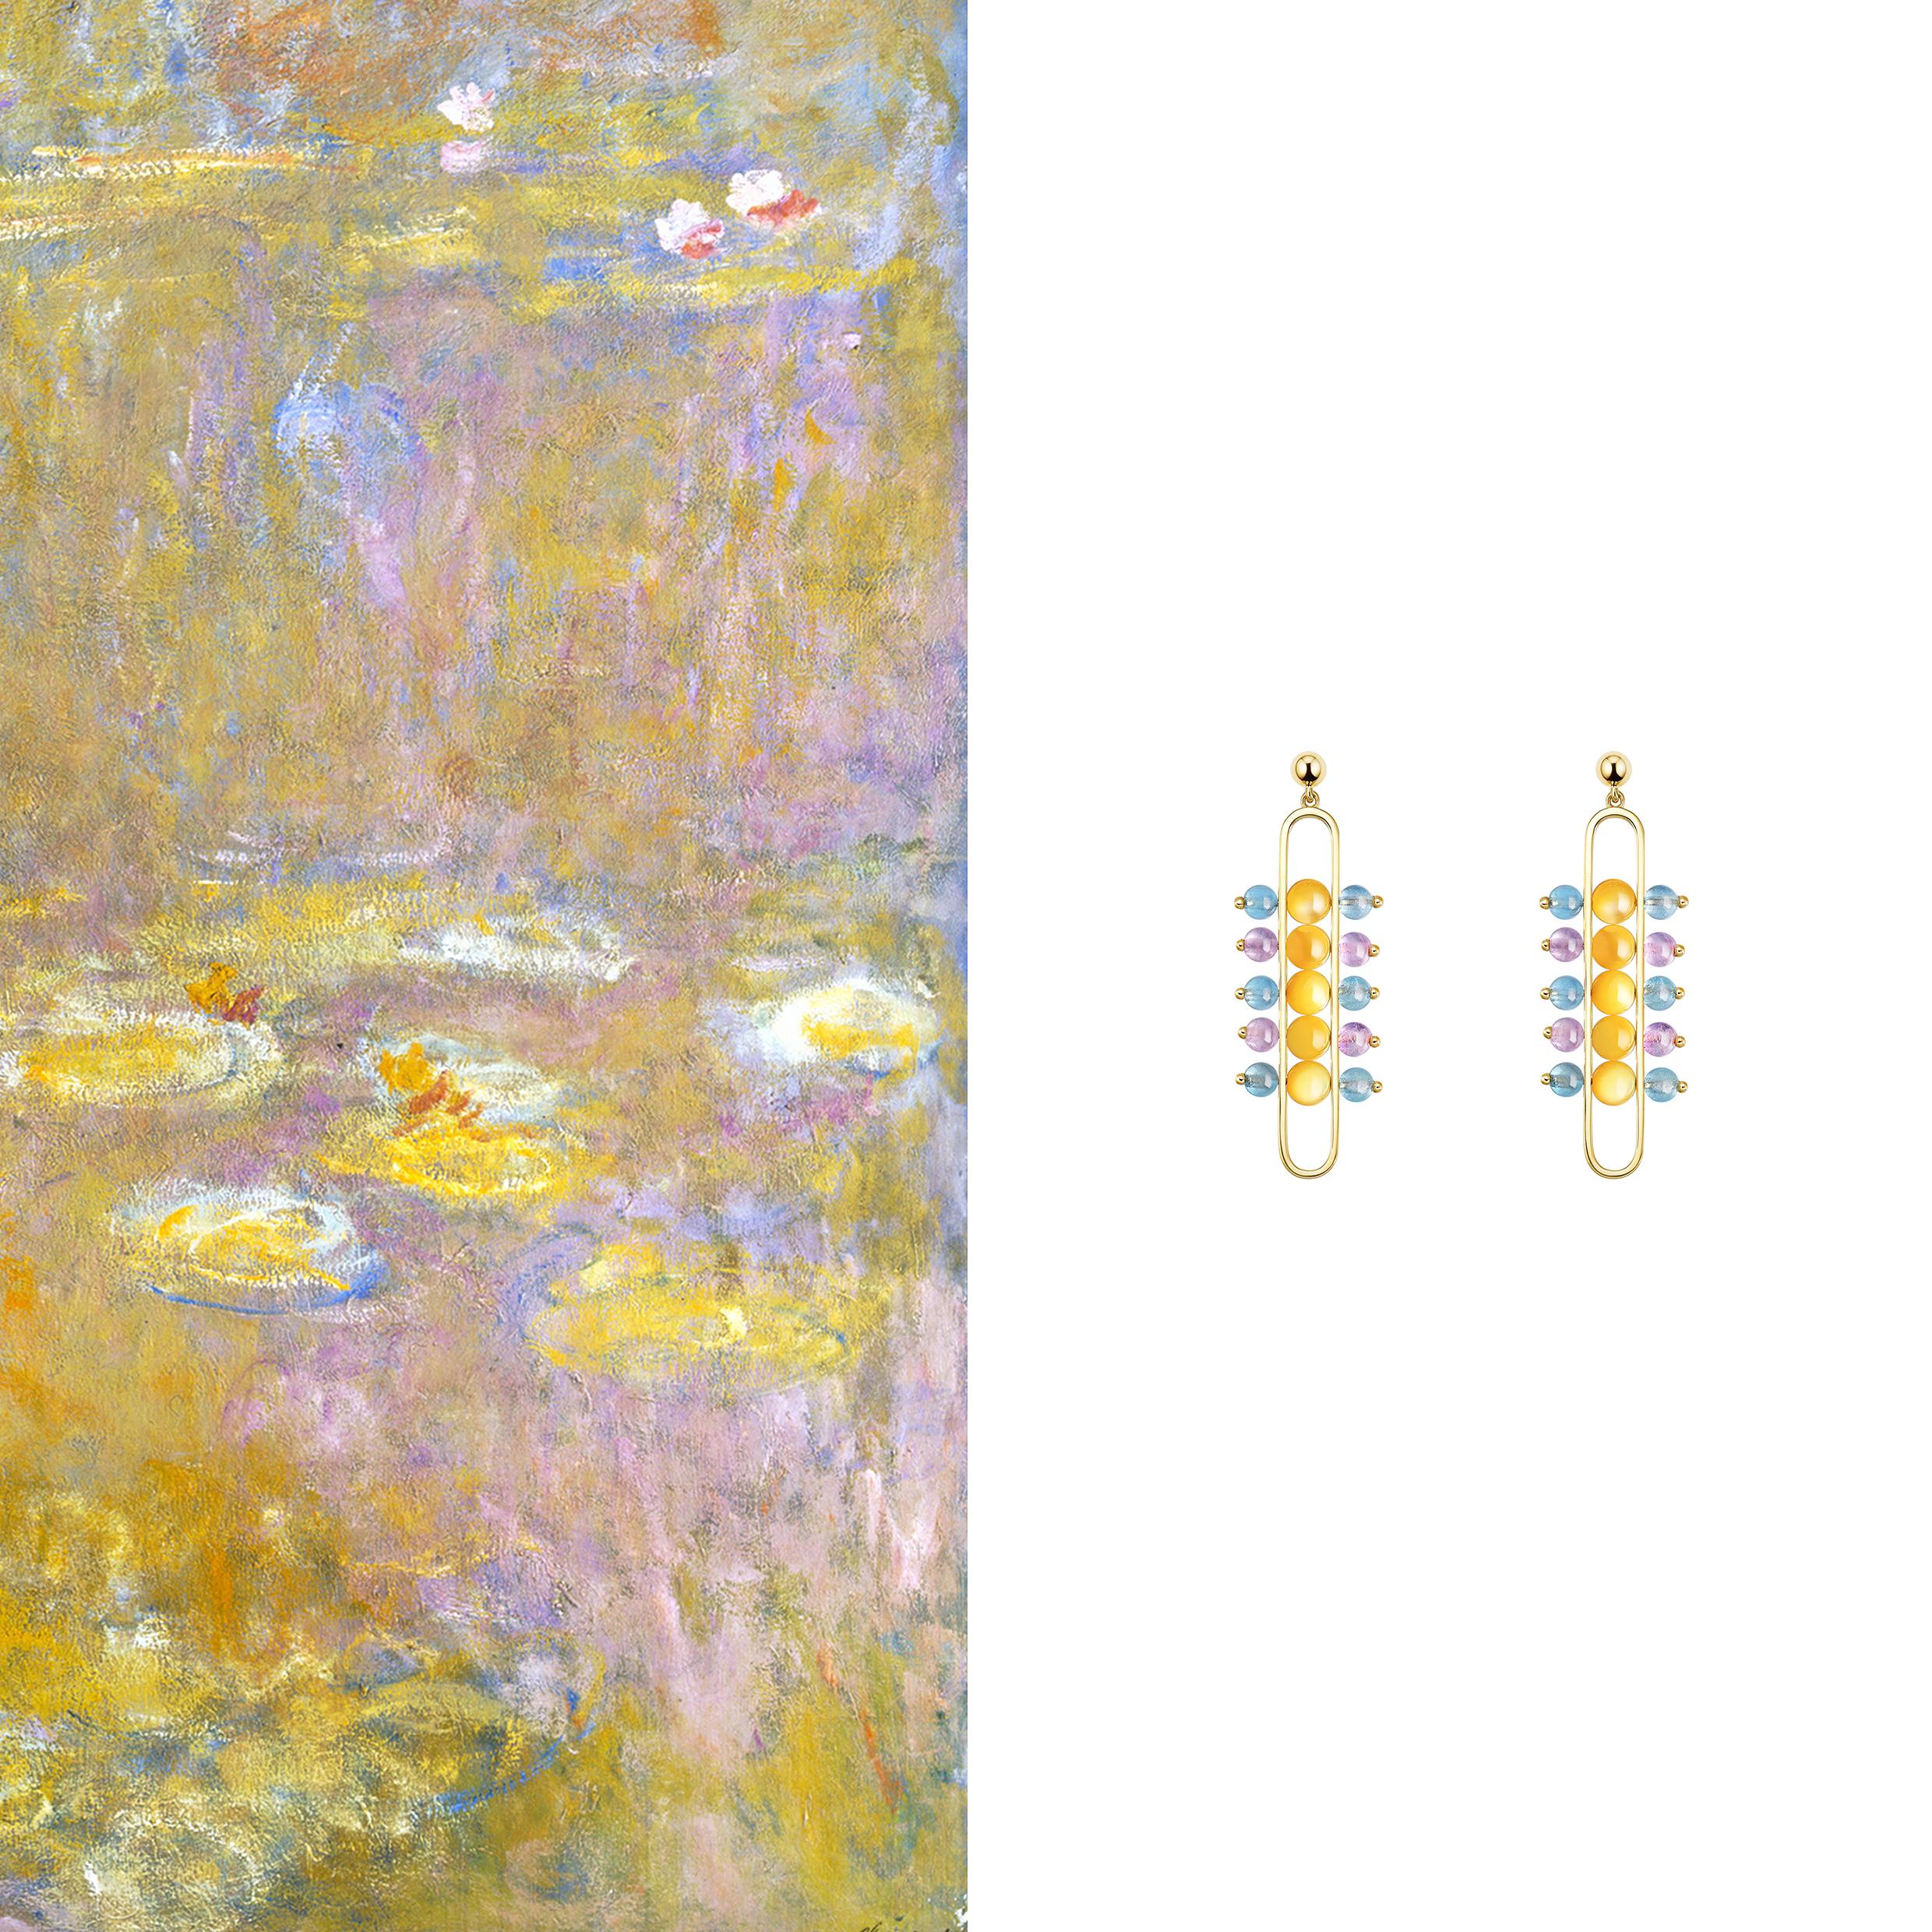 This beautifully crafted pair of earrings features hand selected golden Mother-of-Pearl, Aquamarine and Amethyst beads set in 18k Yellow Gold. The gems are chosen for their quality and colour to best echo those hues in Claude Monet's painting